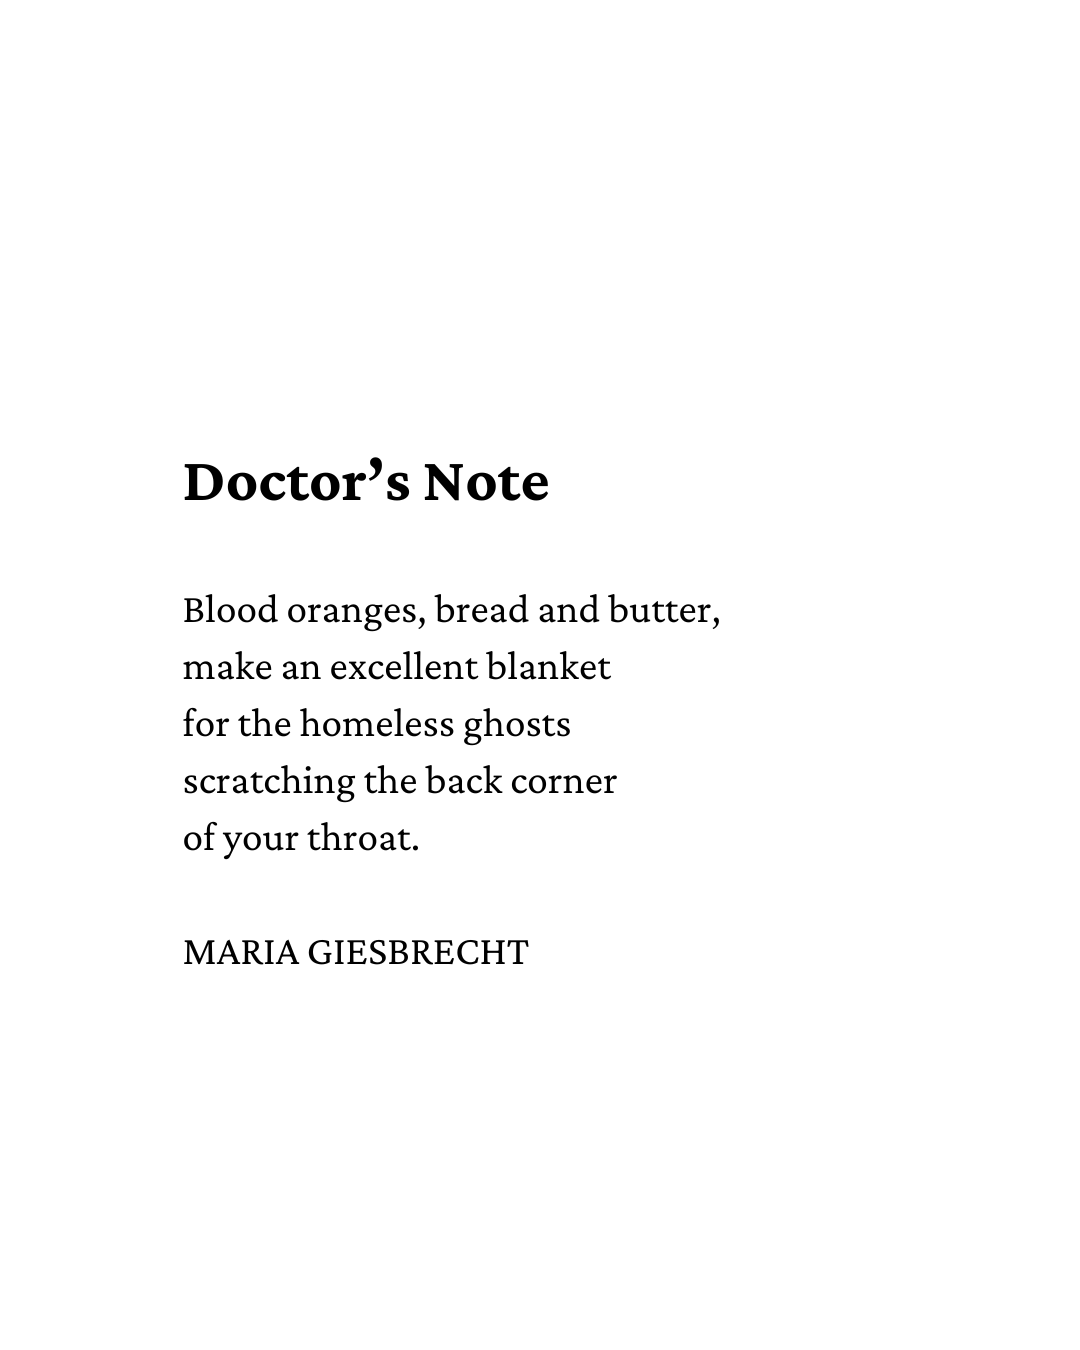 "Doctor's Note"